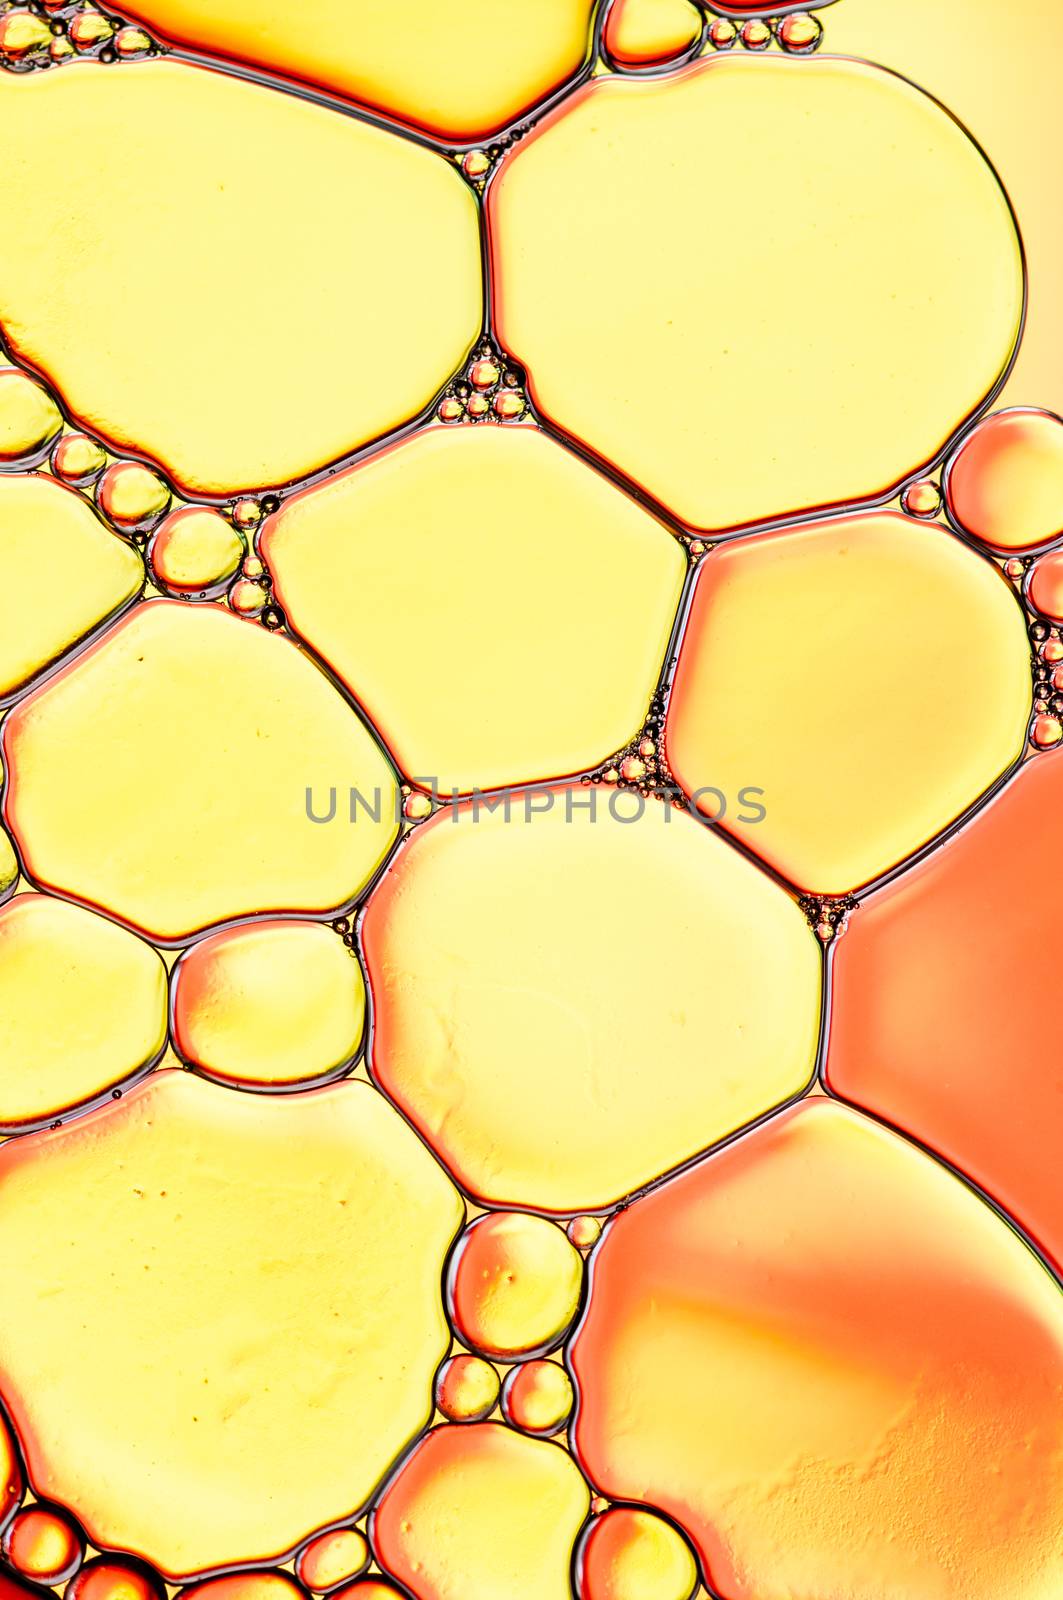 Abstract Colorful reflections on oil and soap bubbles in water